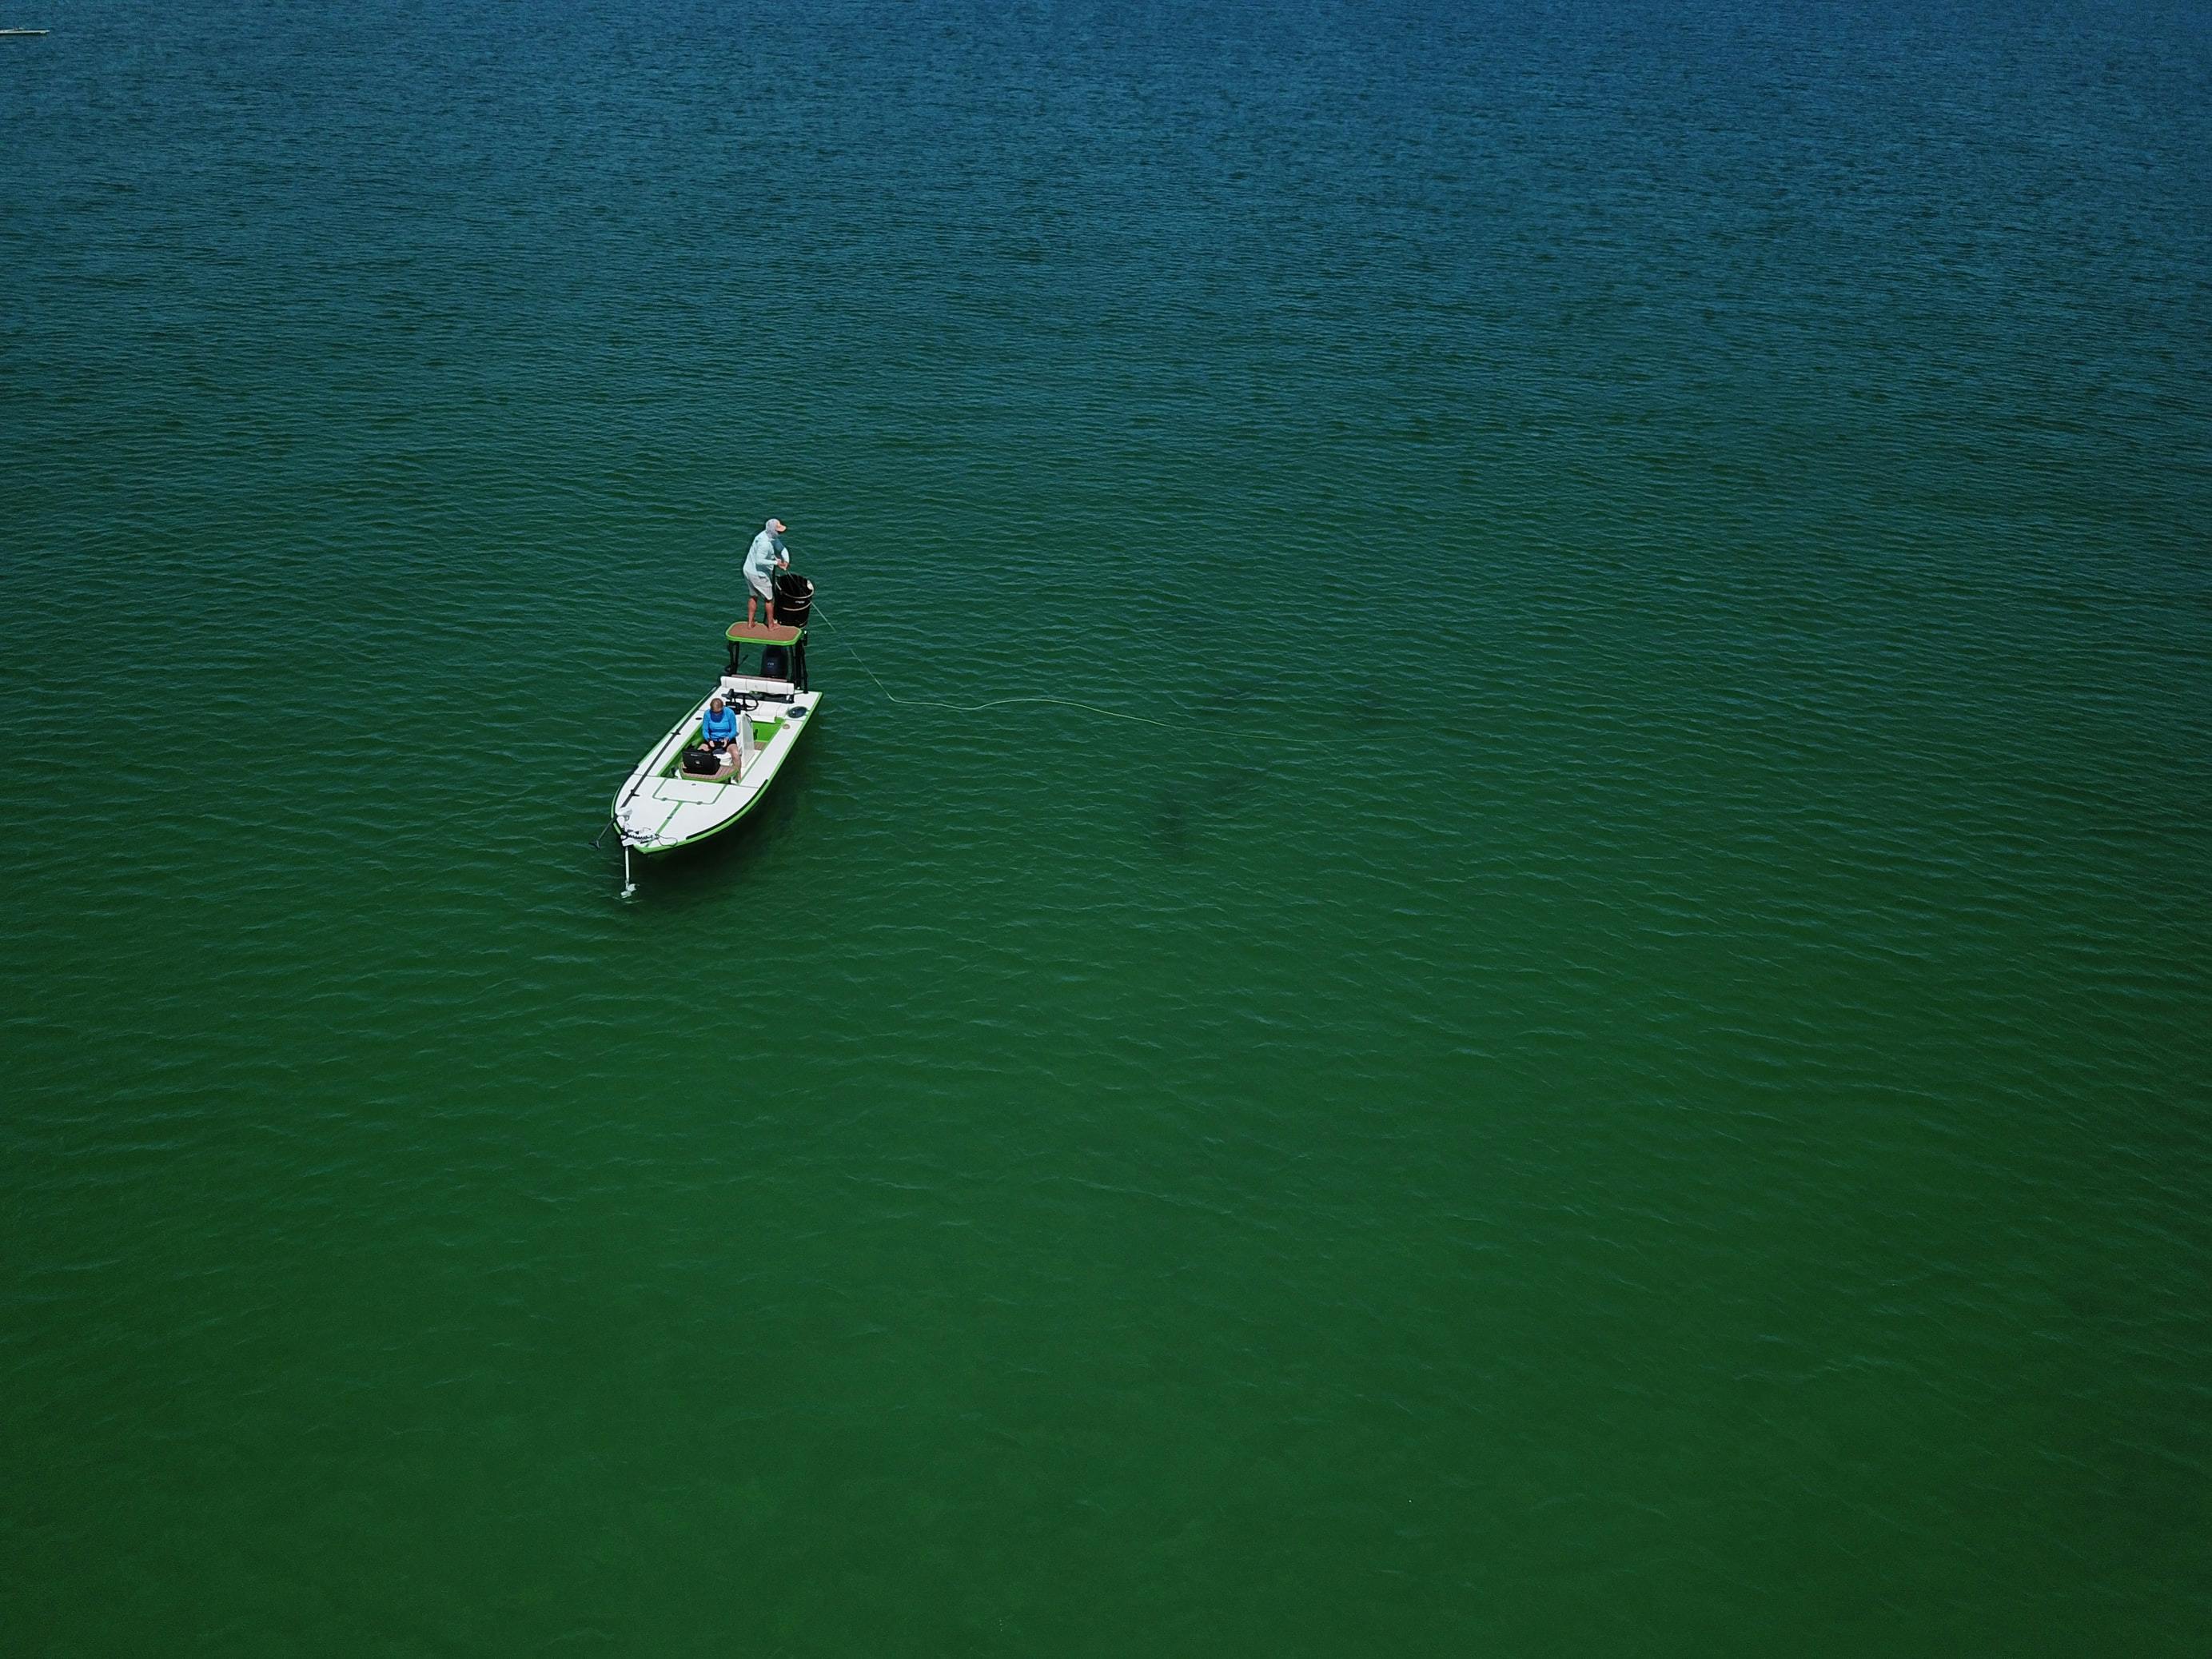 An aerial shot of someone standing on a platform on a boat above shallow water. They are casting with their fly rod.